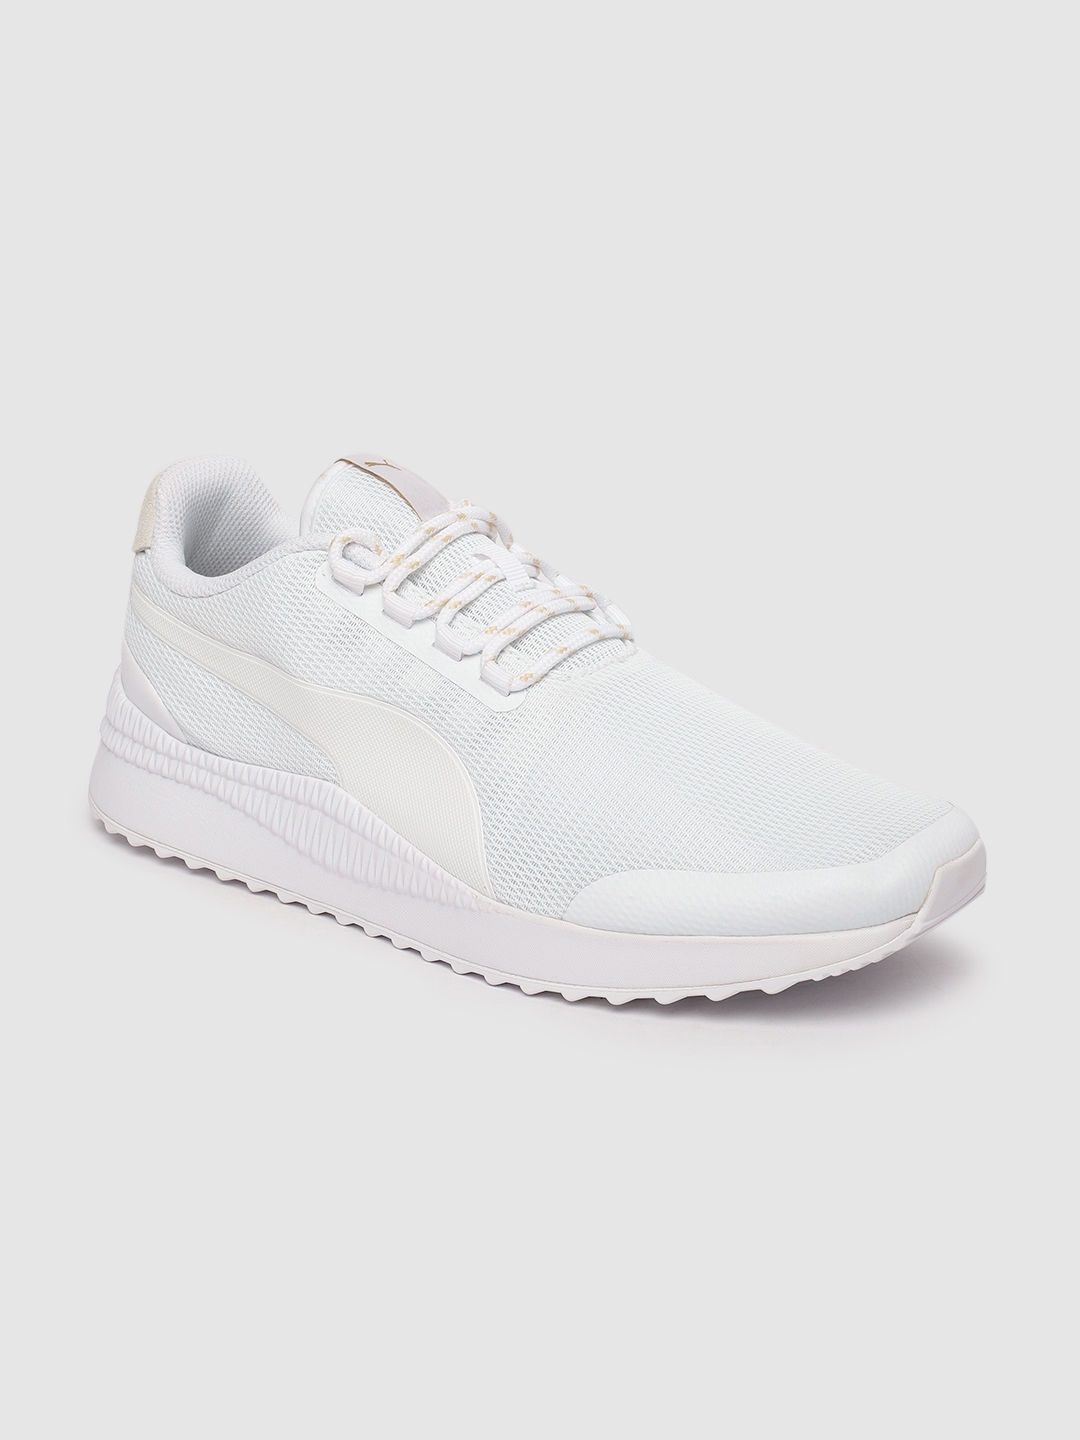 puma unisex pacer next sneakers